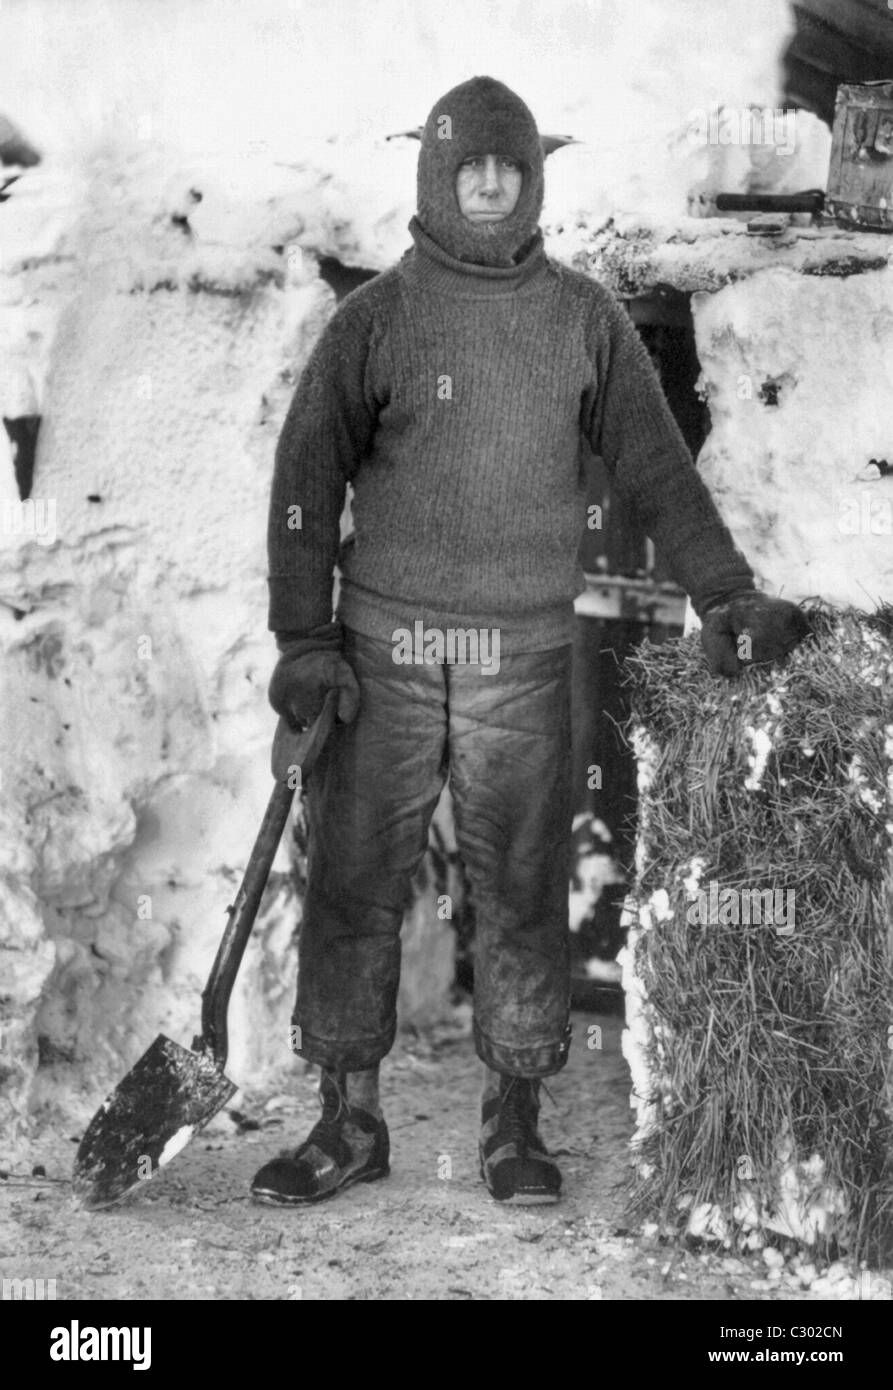 Lawrence Oates (1880 - 1912) - a member of Robert Scott's Terra Nova Expedition that perished after reaching the South Pole. Stock Photo